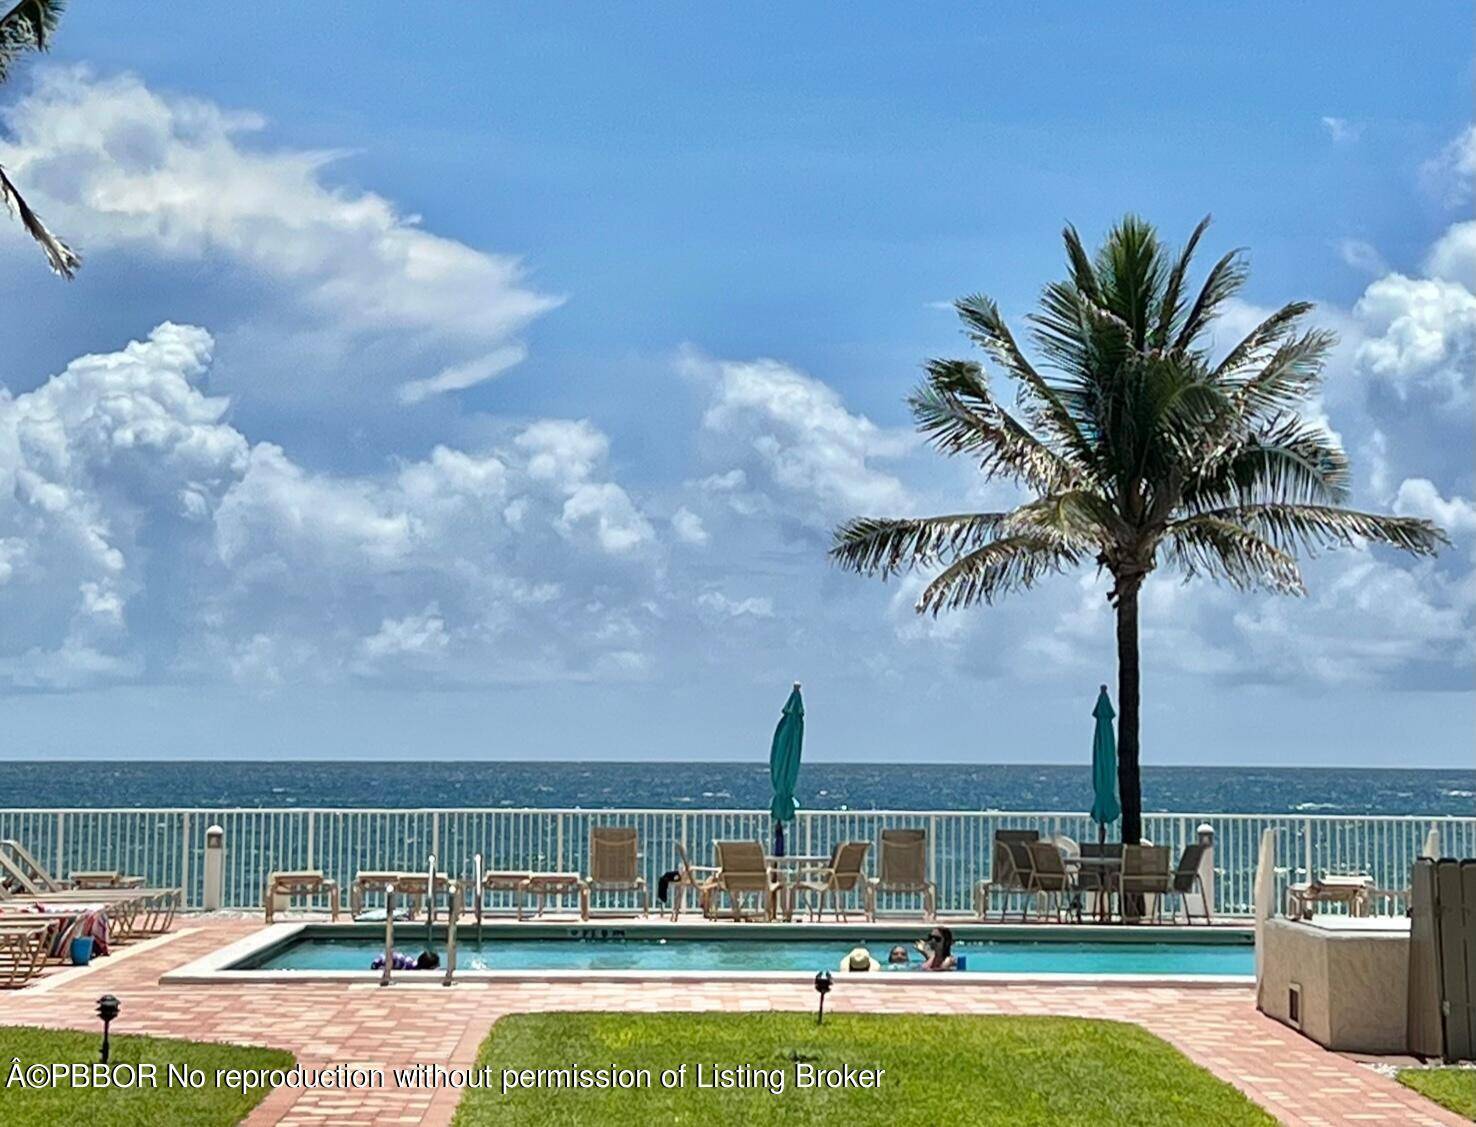 This the best value for a renovated two bedroom two bathroom seasonal unit on the ocean in South Palm Beach.